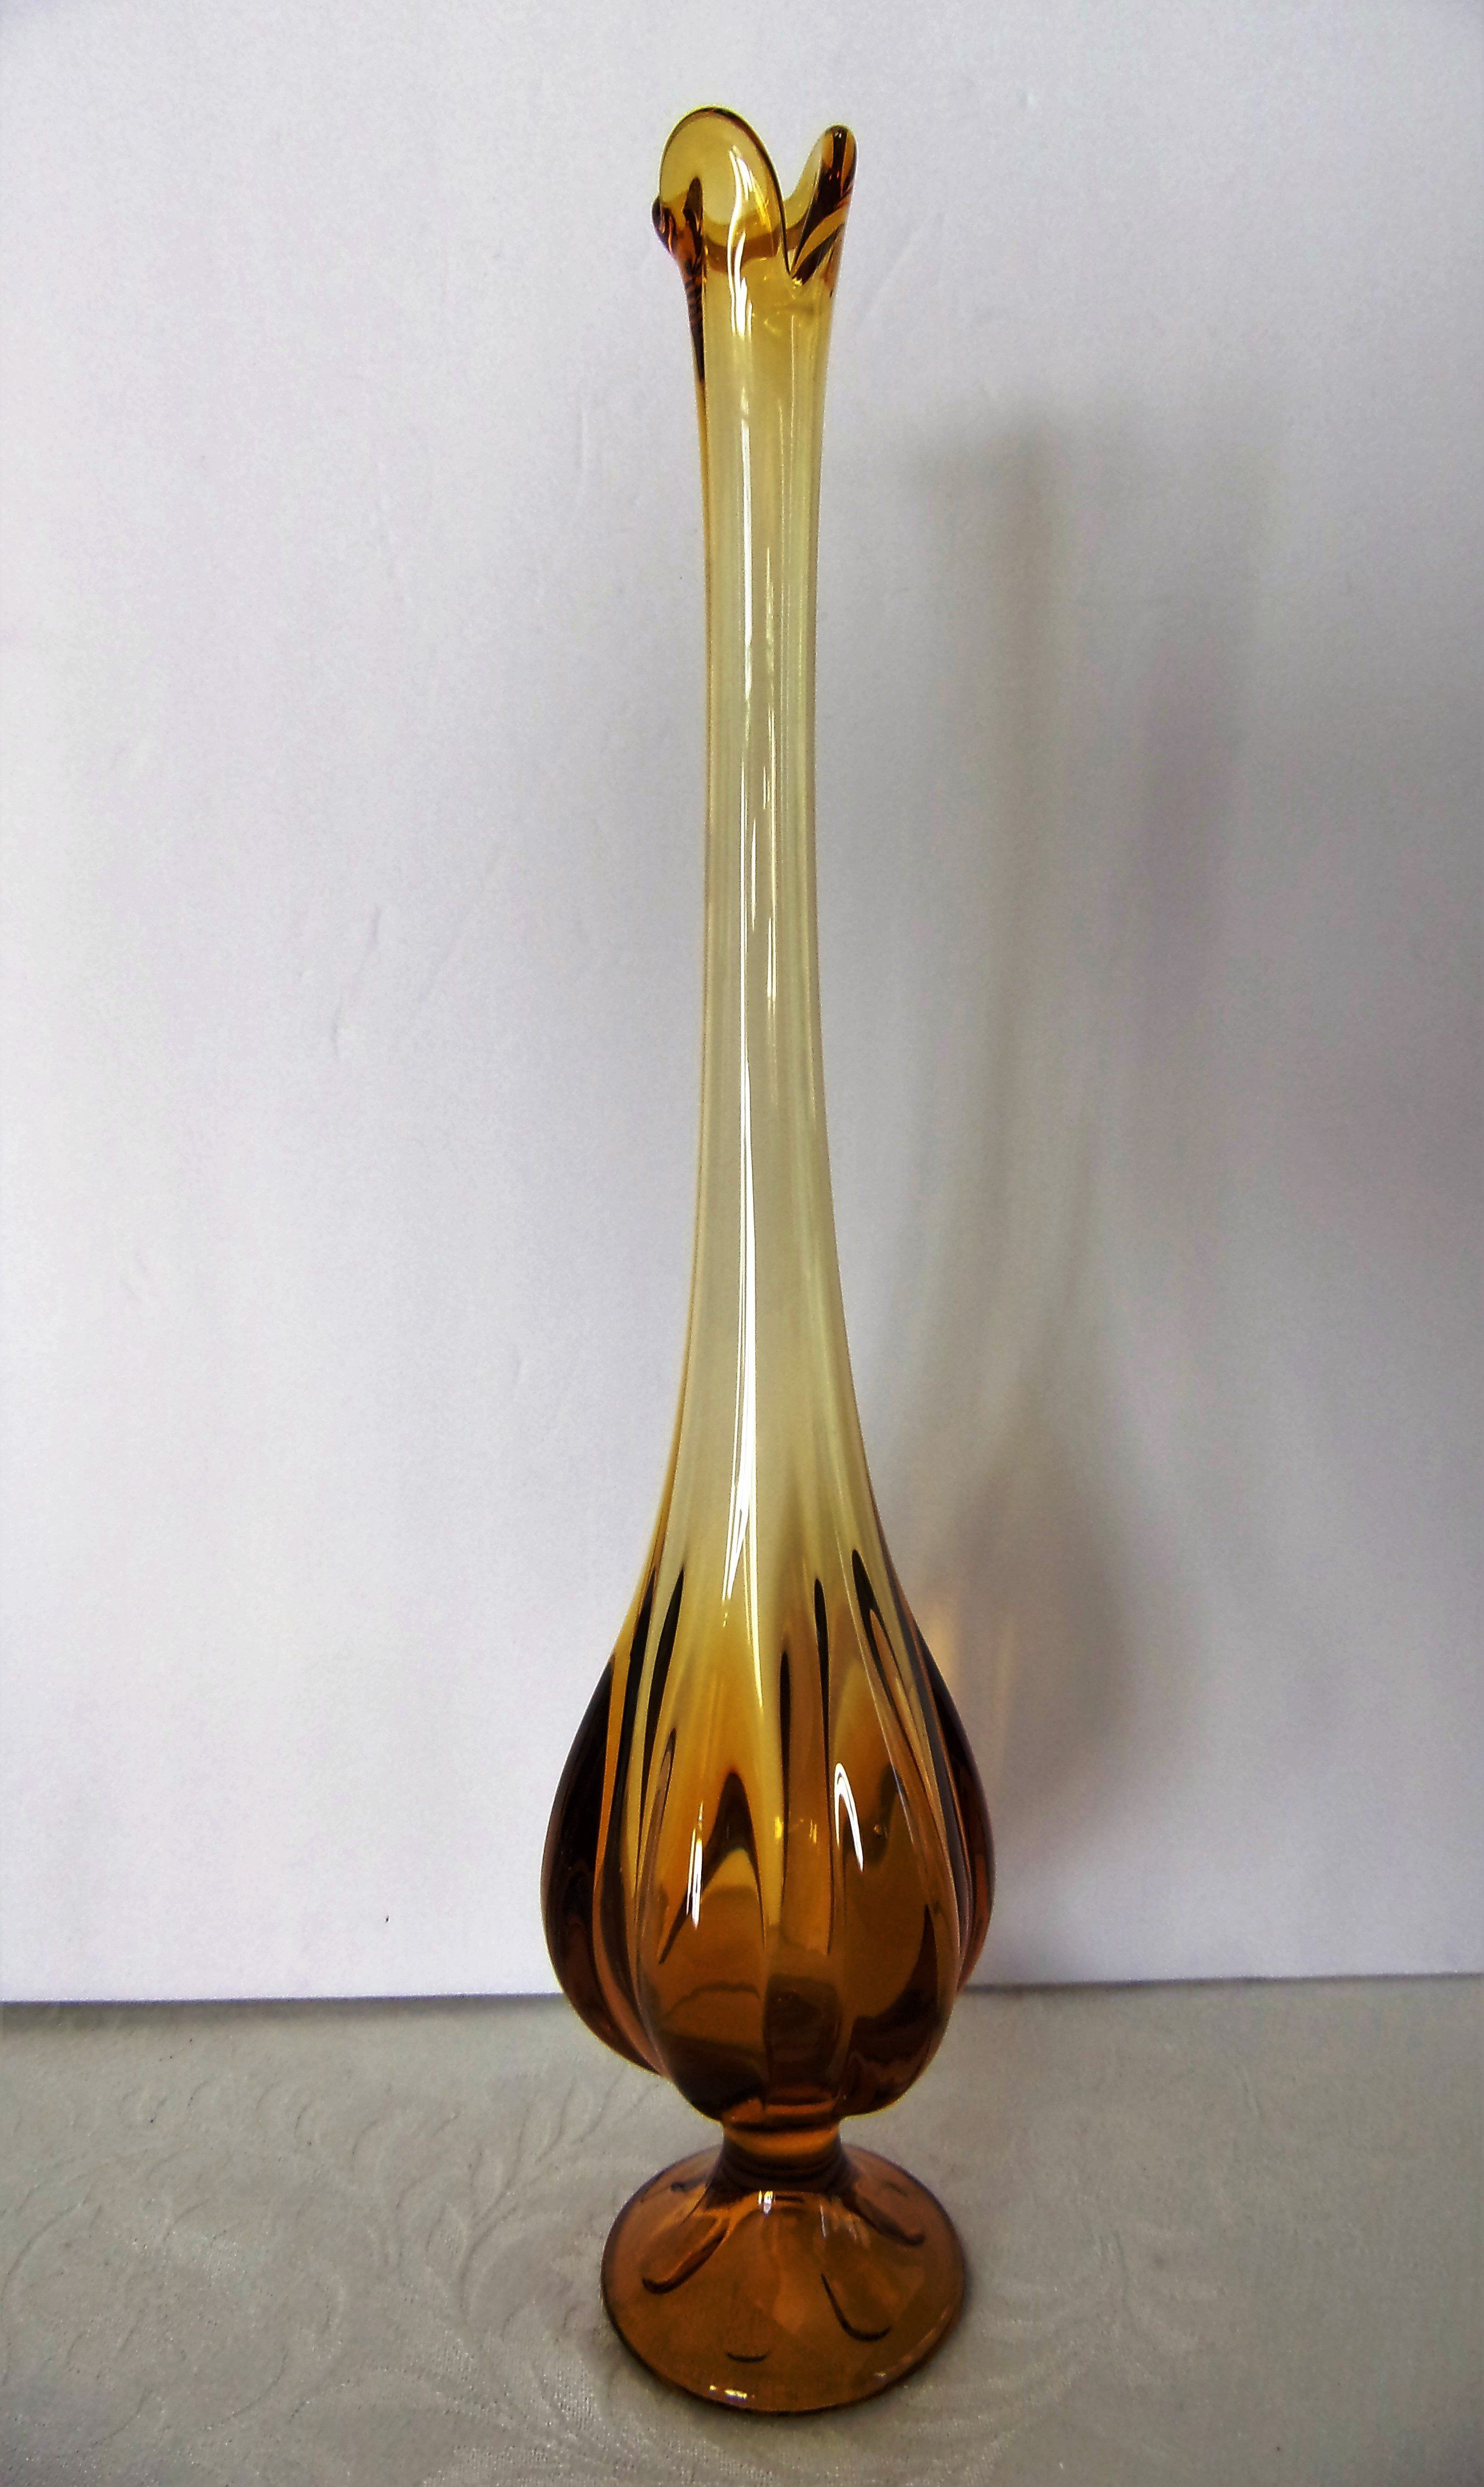 22 Lovable Viking Glass Vase 2024 free download viking glass vase of this is a great looking amber bud vase by viking glass co i want to intended for this is a great looking amber bud vase by viking glass co i want to